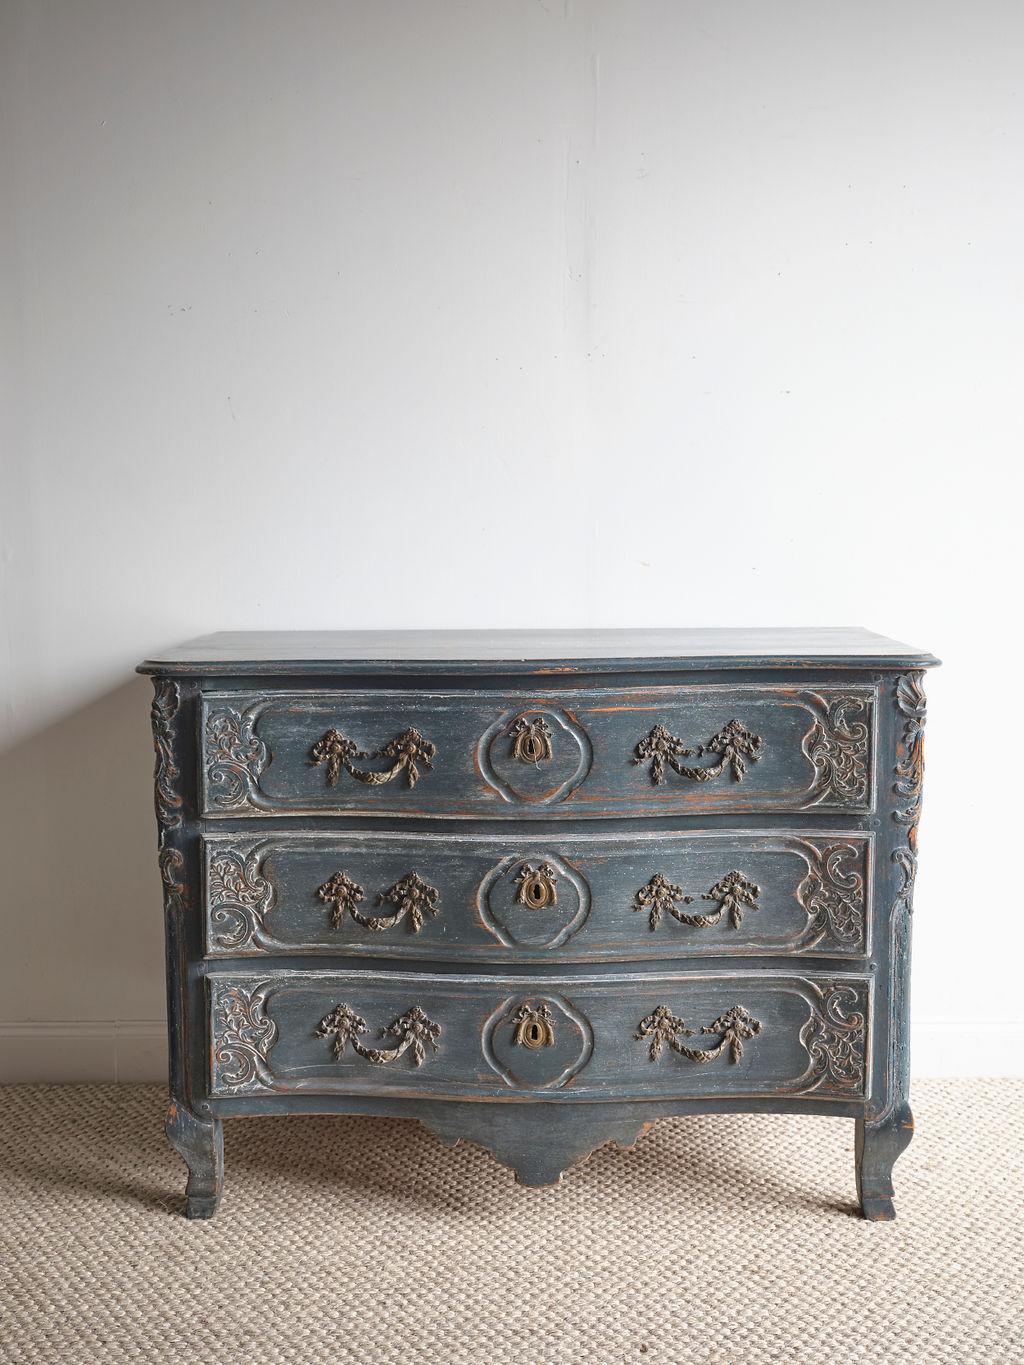 This is an incredible blue painted French commode. The year it was painted is unknown, but seems to be in the same period of the chest since the paint is aged. The lovely hardware is ornate and original. There are unique wood carved details along